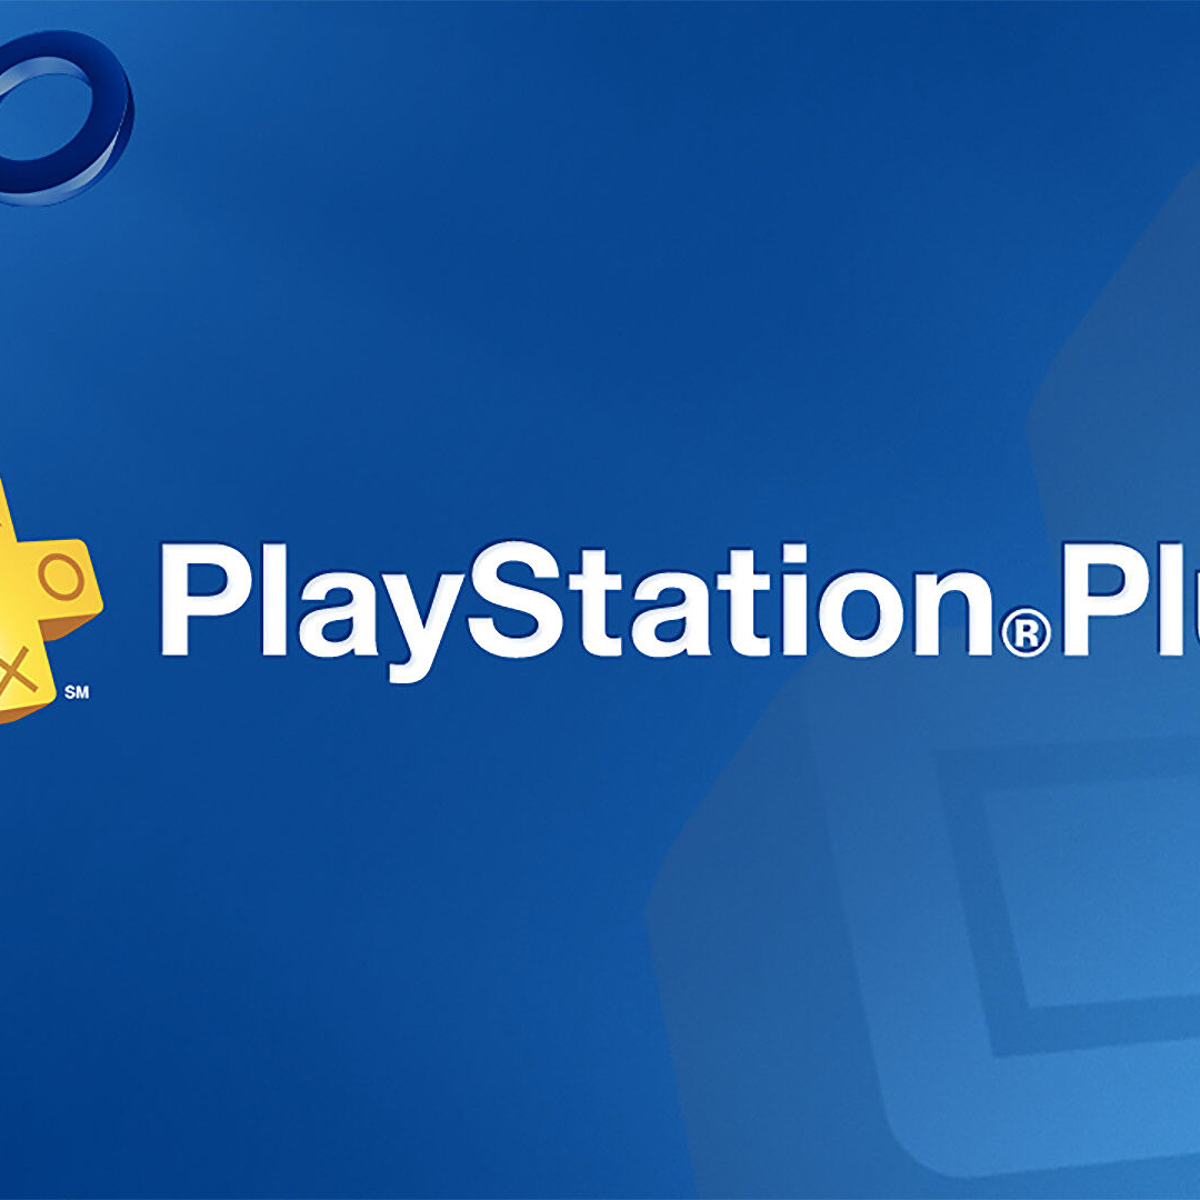 PlayStation Plus is having a free online multiplayer weekend from Saturday